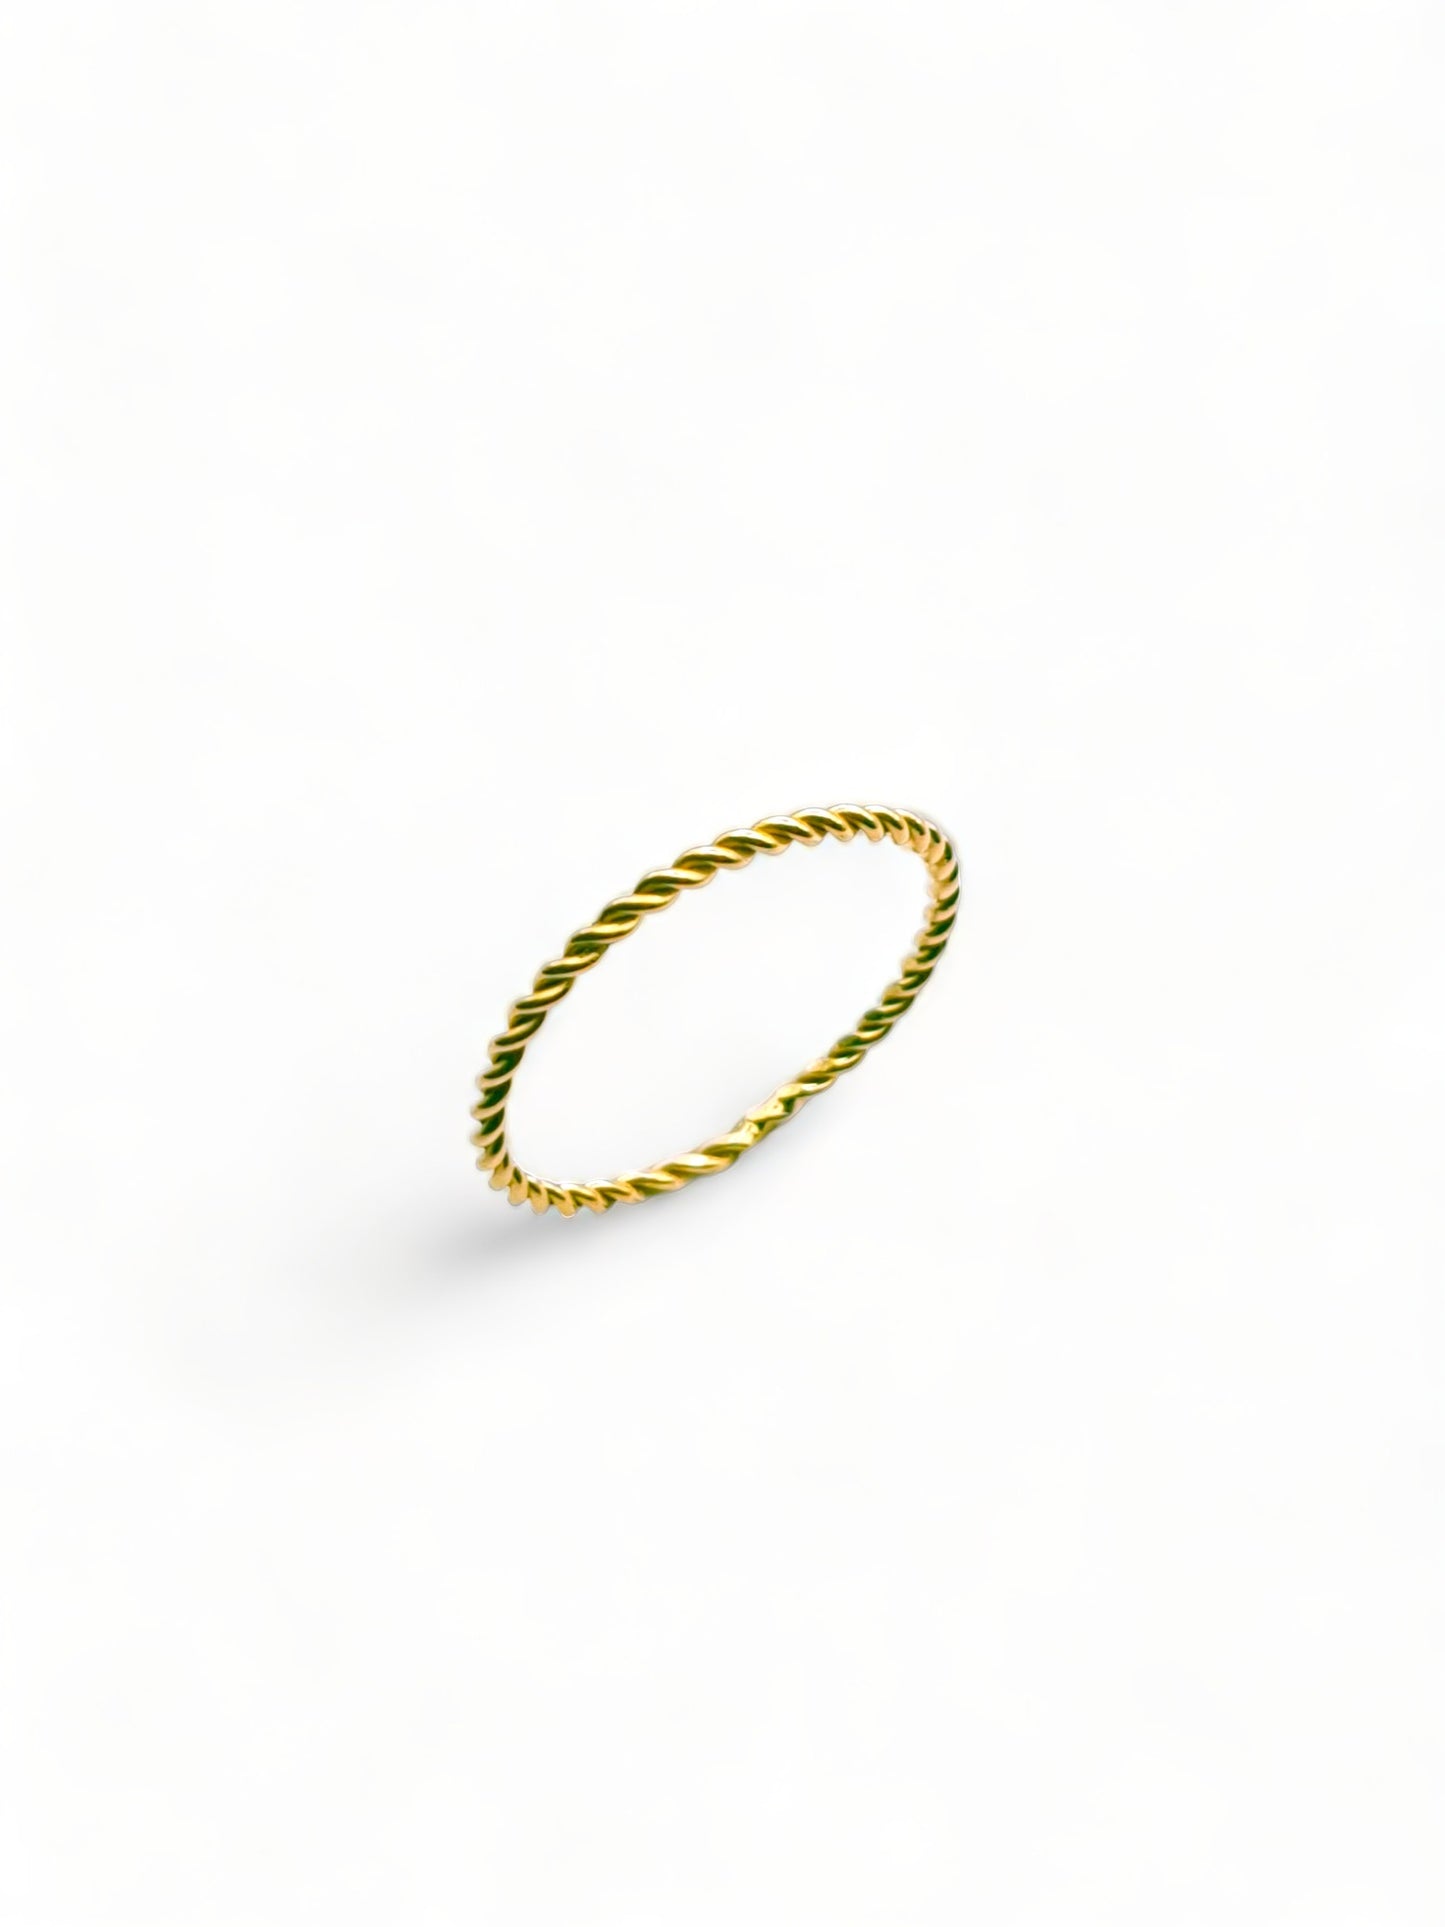 Solid 18ct Gold Women's Twist Ring, angled photo